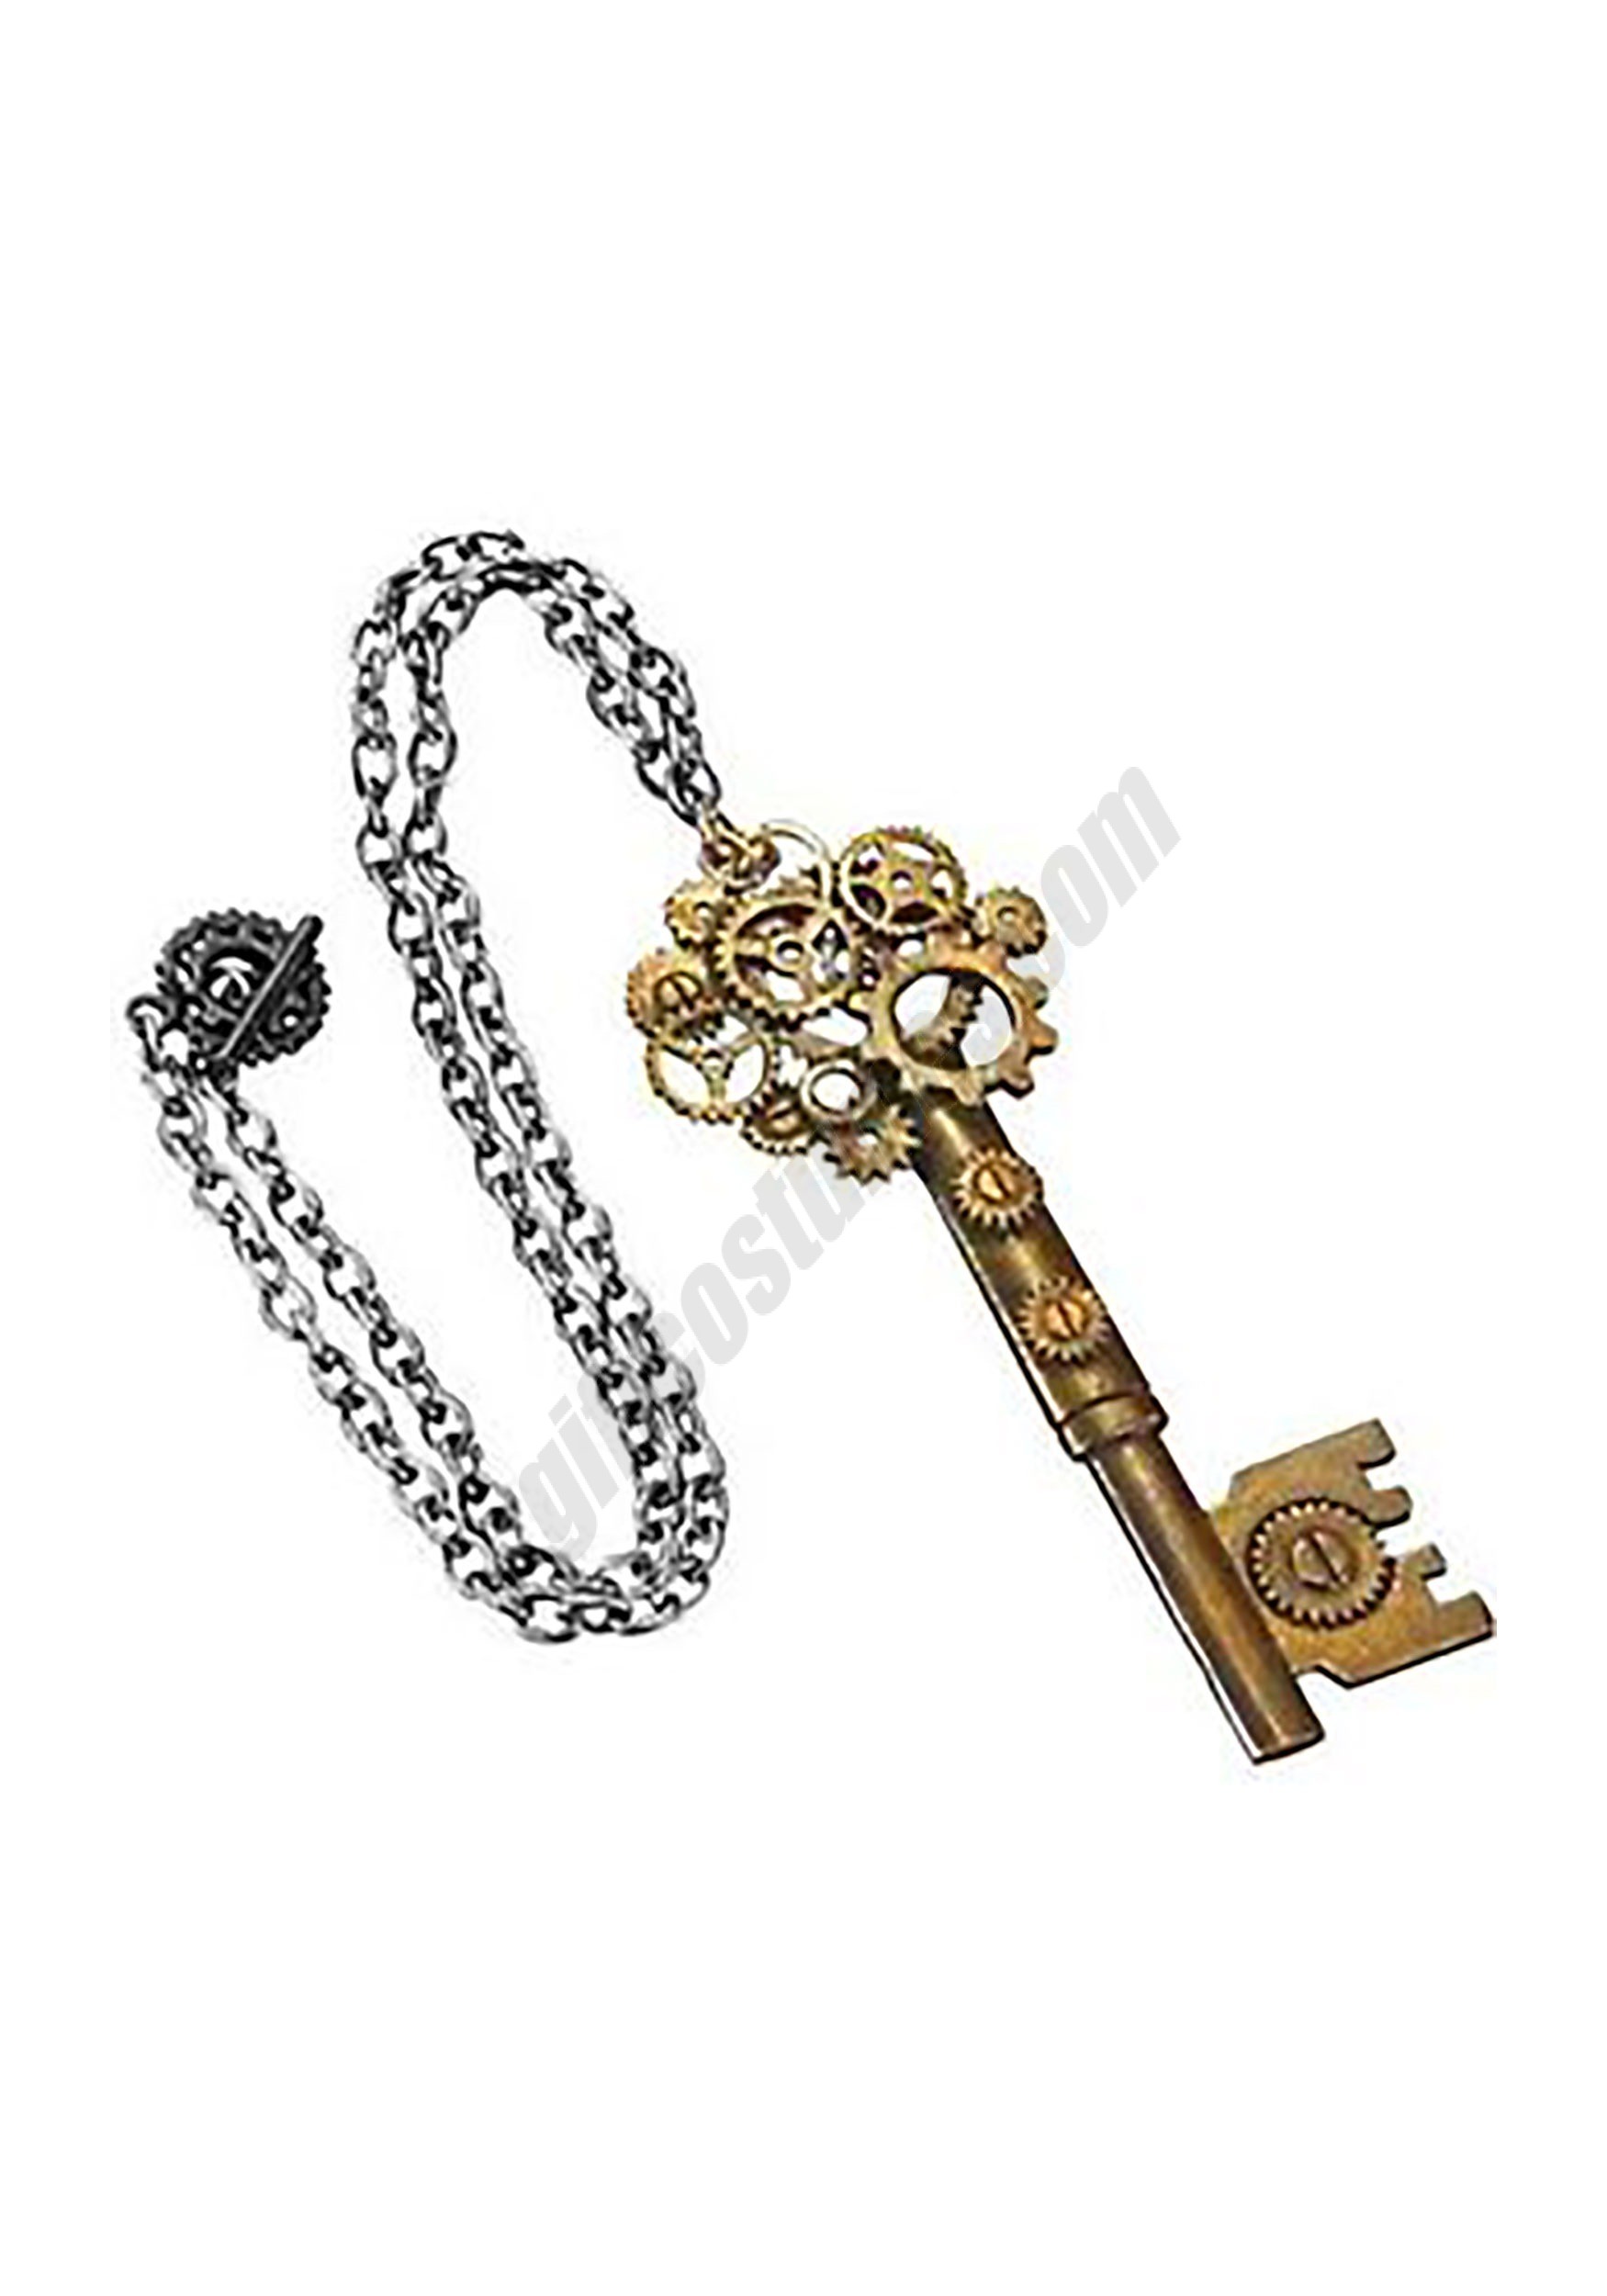 Large Key Gear Adult Necklace Promotions - Large Key Gear Adult Necklace Promotions